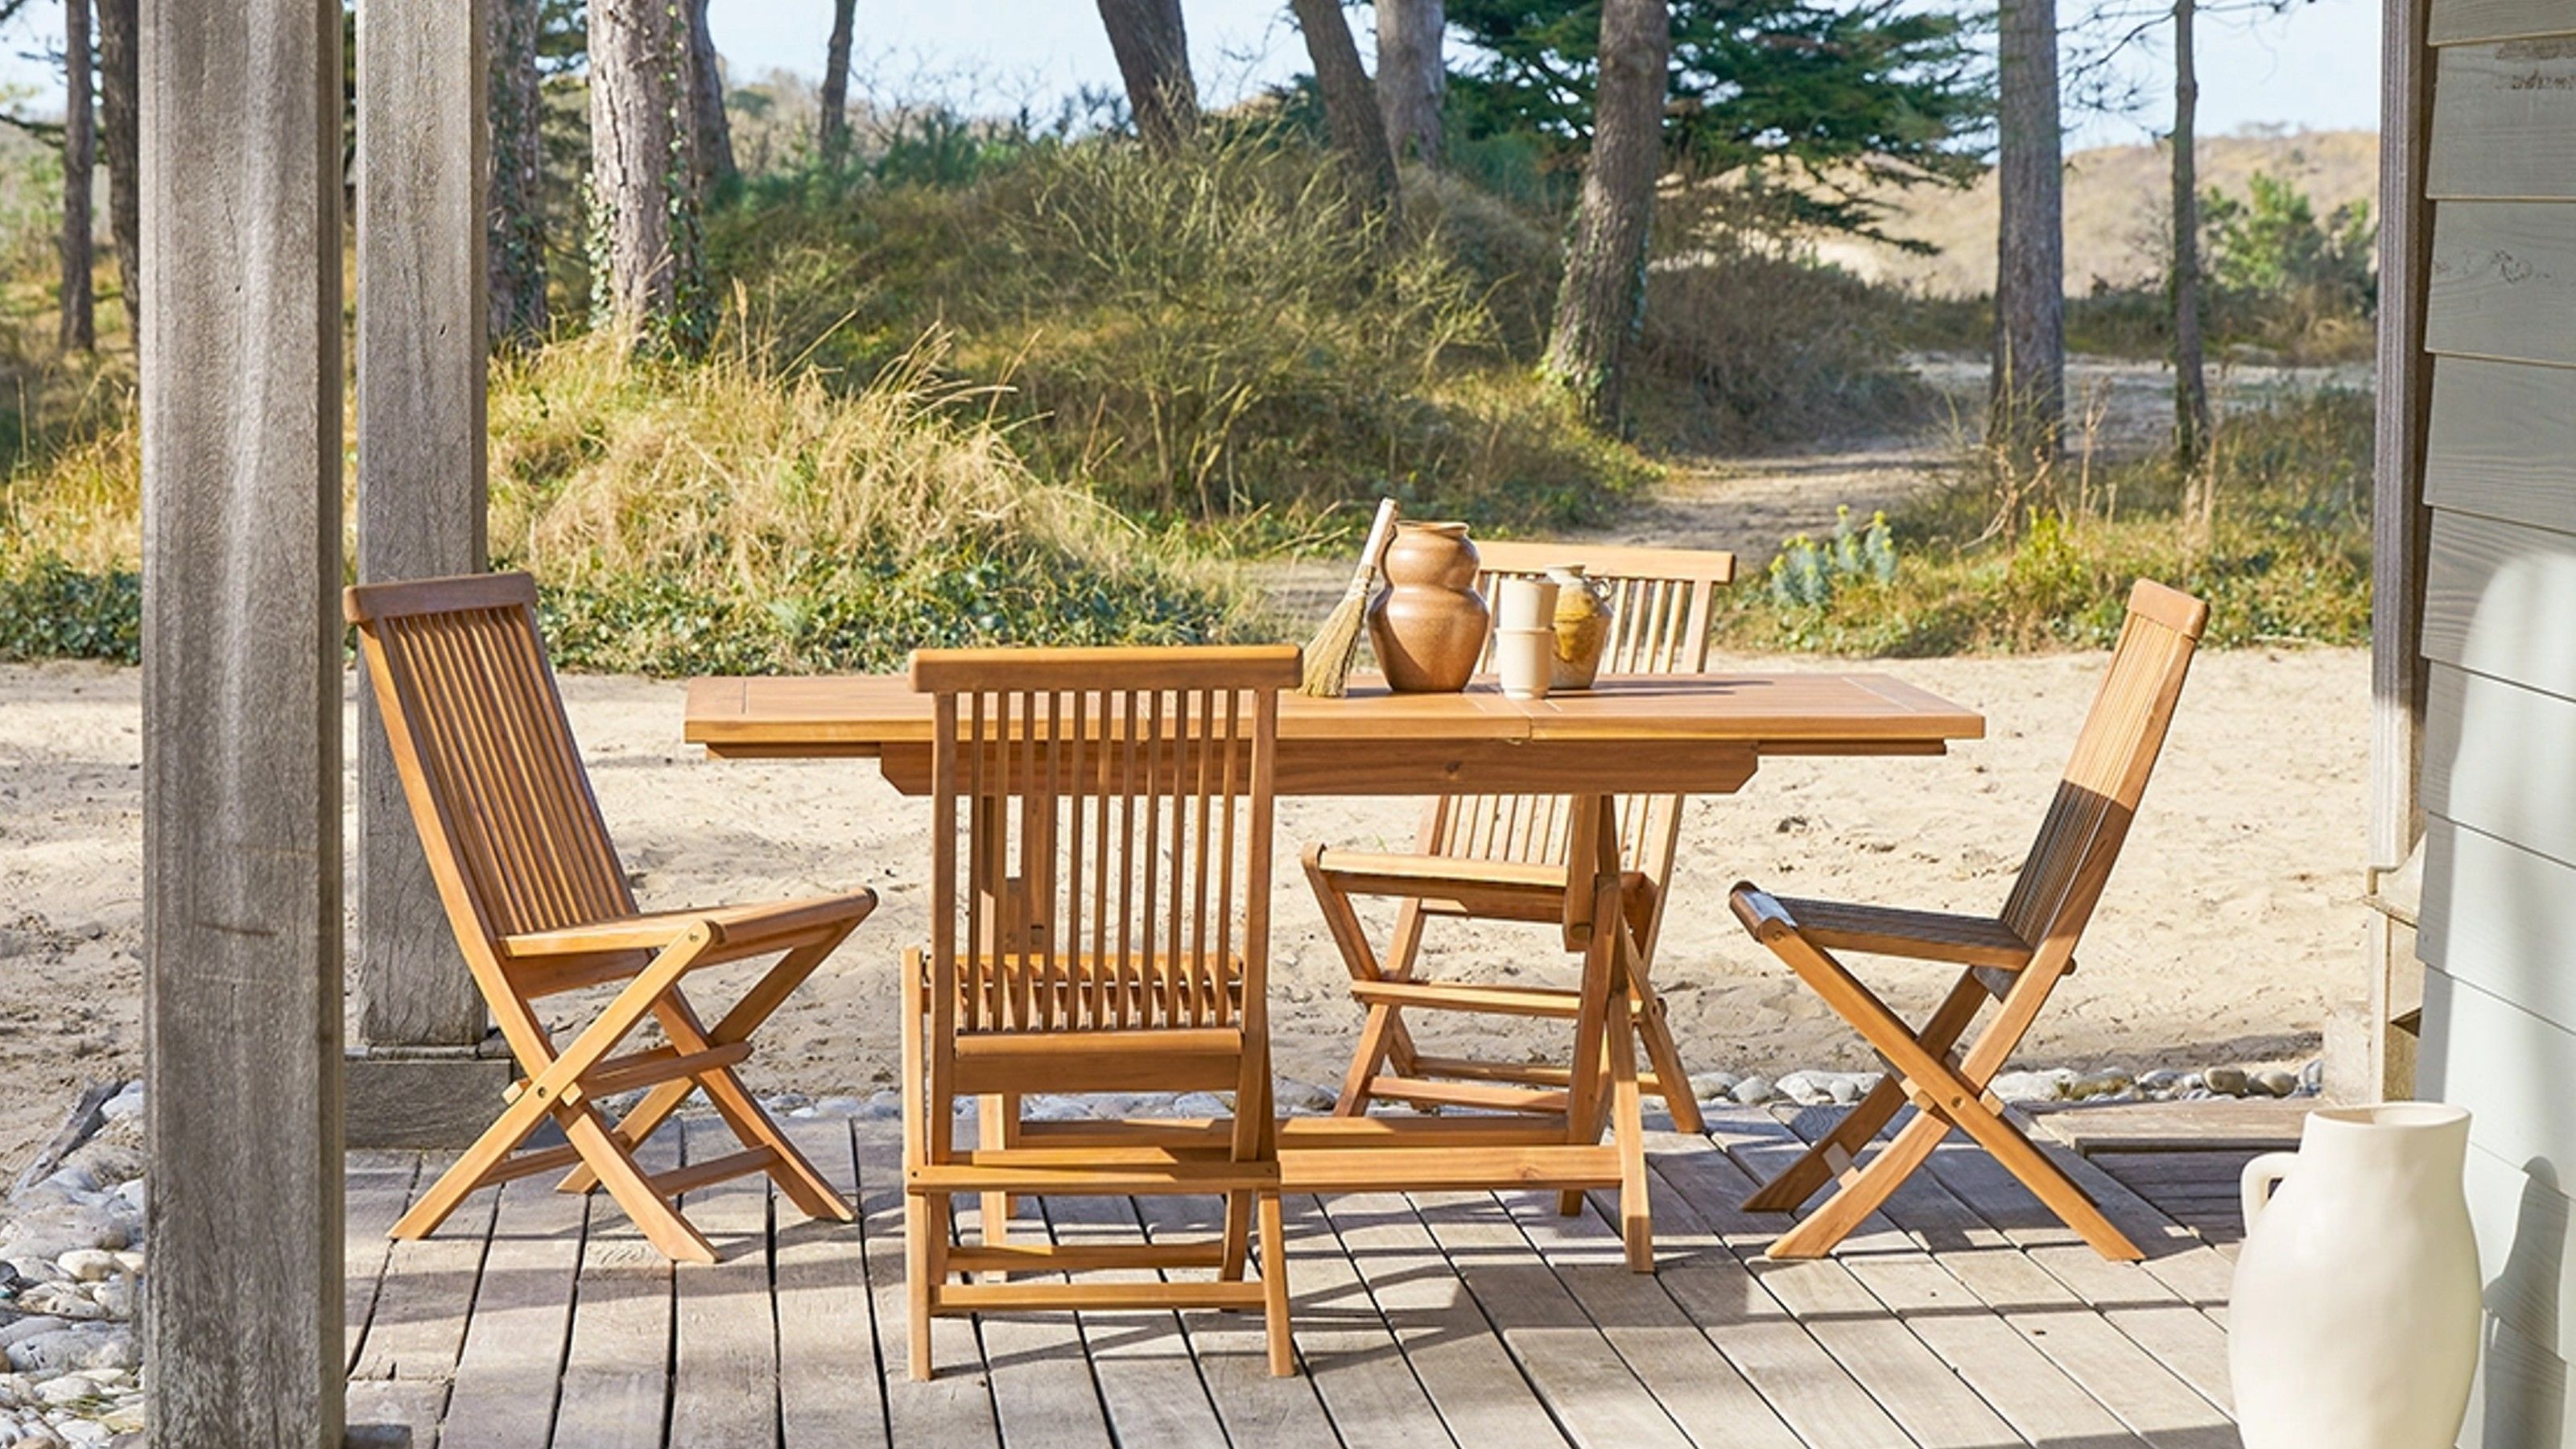 Best Wooden Garden Furniture 2022: What And Where To Shop | Gardeningetc Throughout Acacia Wood With Table Garden Wooden Furniture (View 6 of 15)